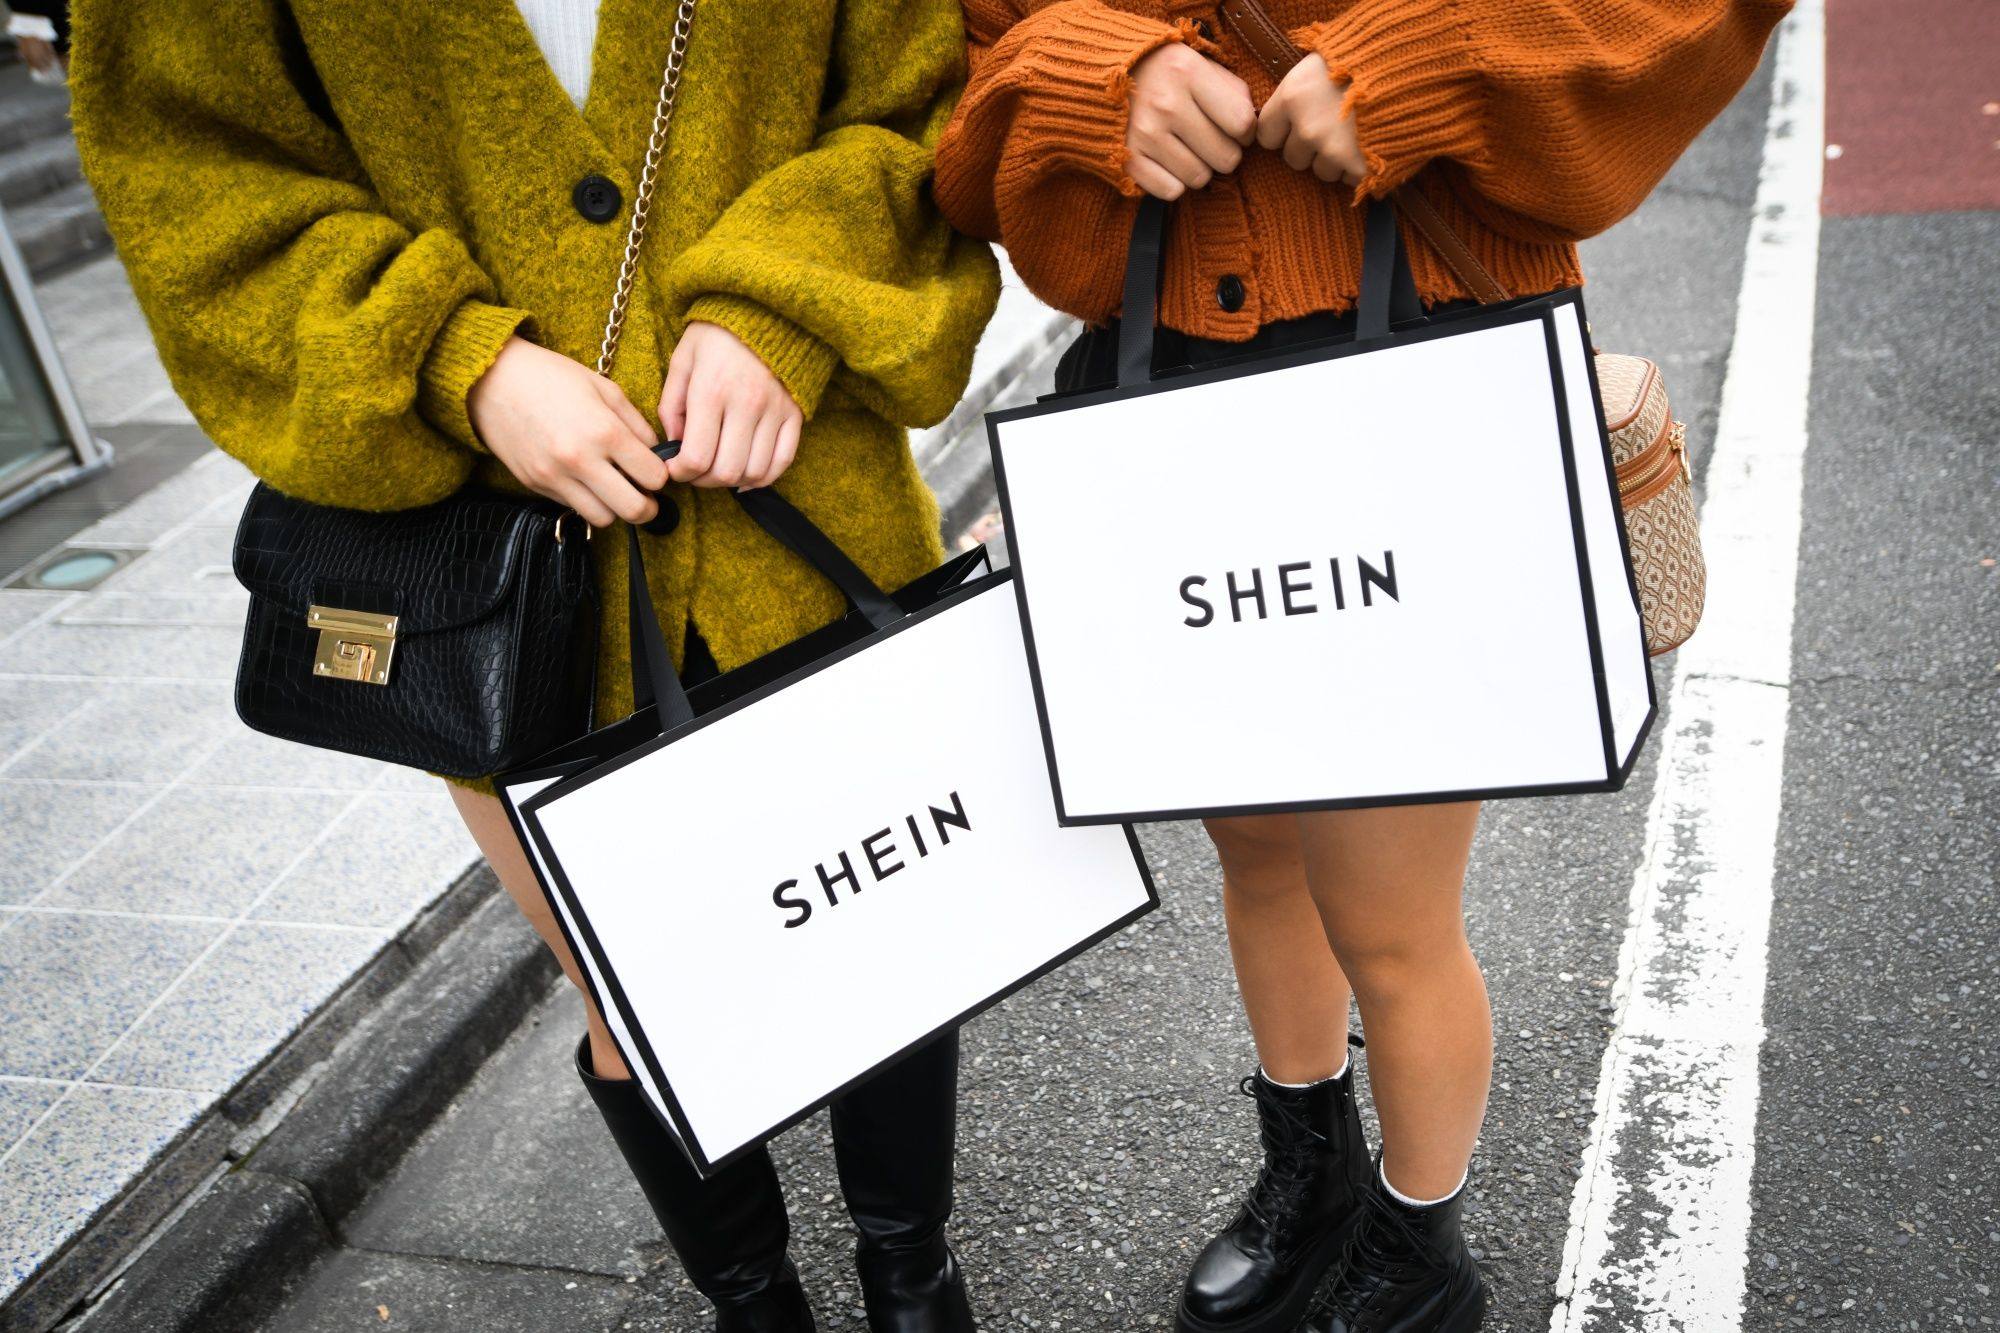 Fast fashion retailer Shein is stepping up preparations for a London listing, but some UK lawmakers want more scrutiny of the Chinese-founded company. Photo: Bloomberg